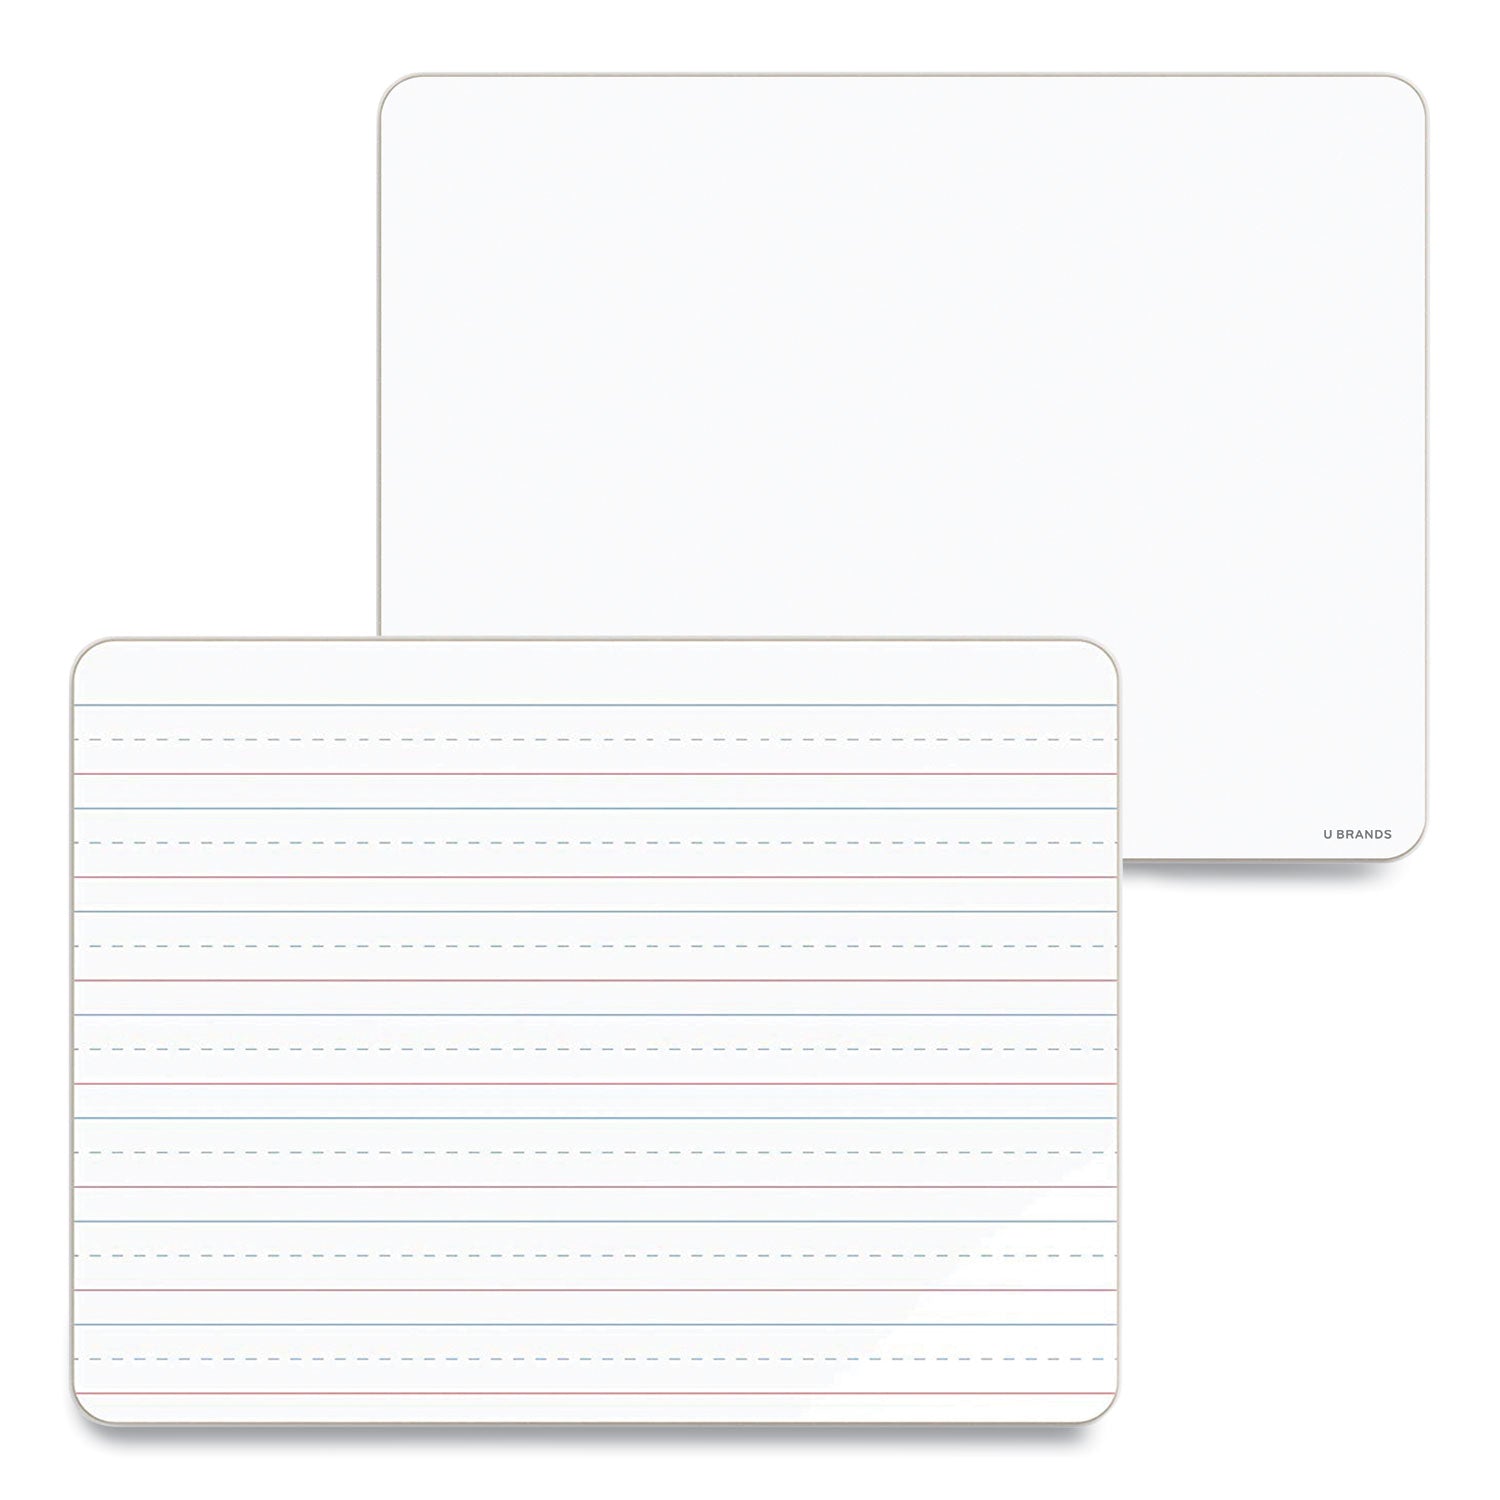 double-sided-dry-erase-lap-board-12-x-9-white-surface-10-pack_ubr483u0001 - 2